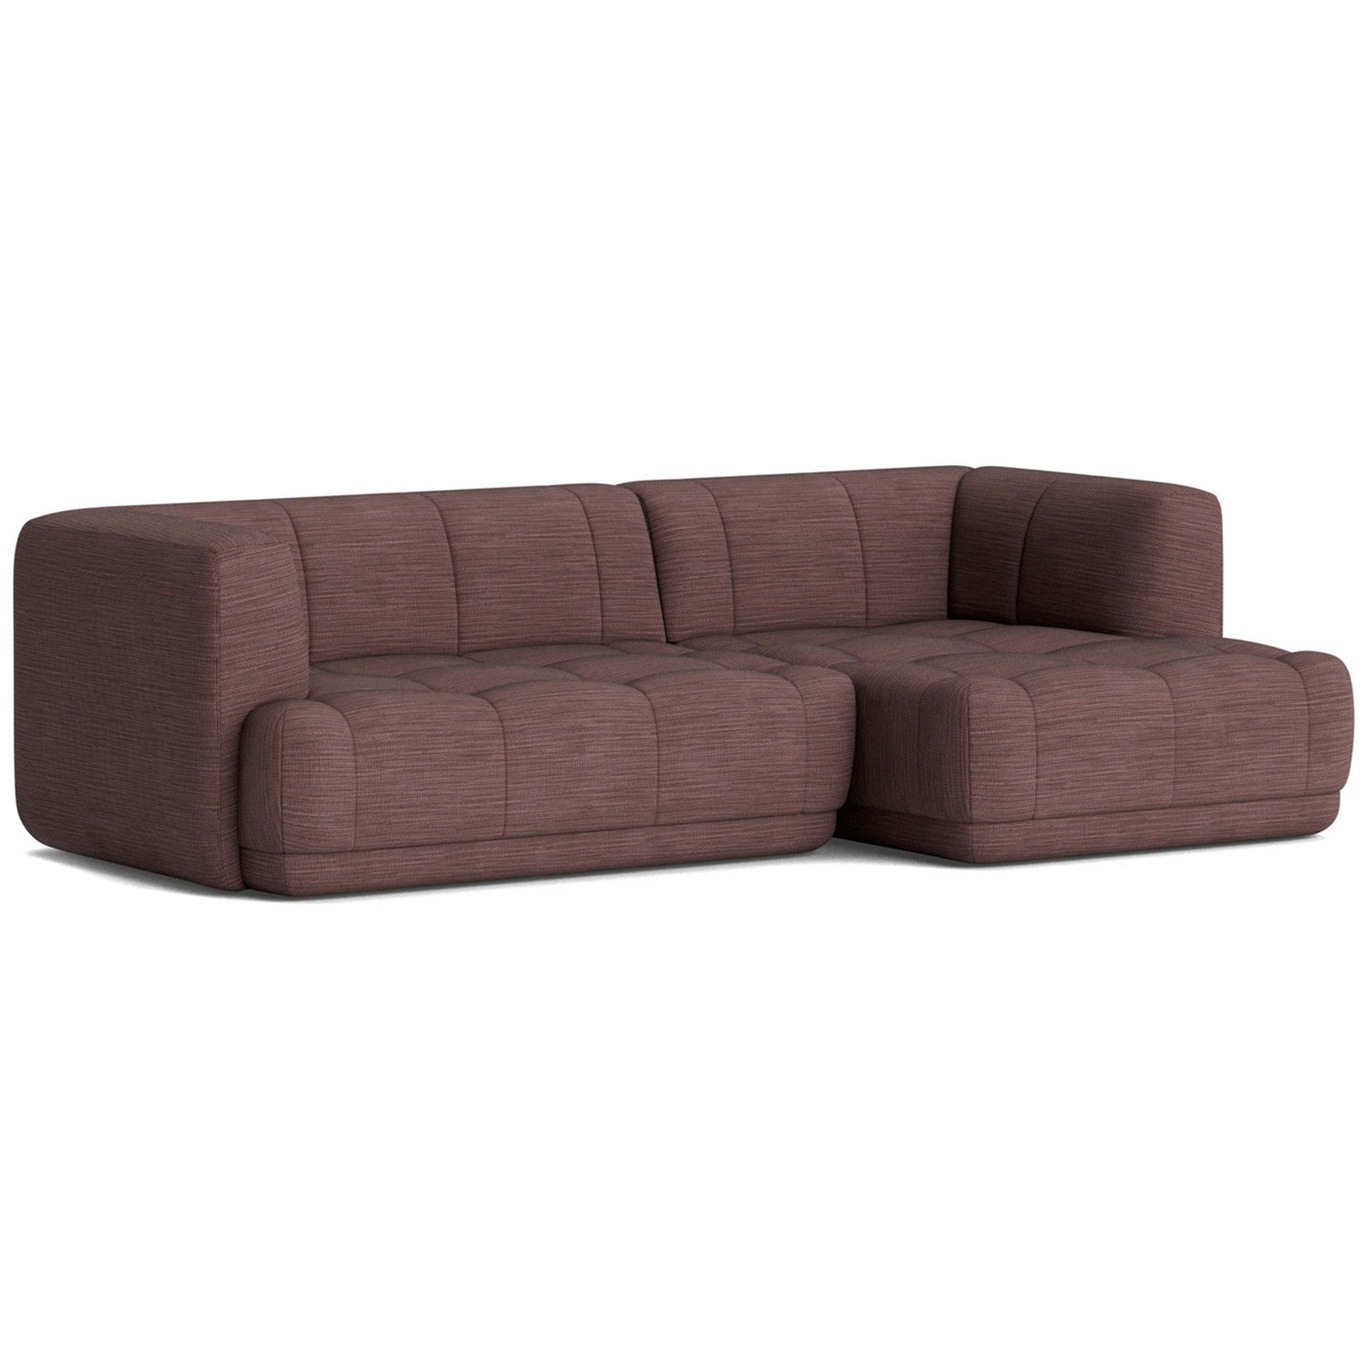 Quilton 3-Seater Sofa Configuration 19 Right, Raas 662